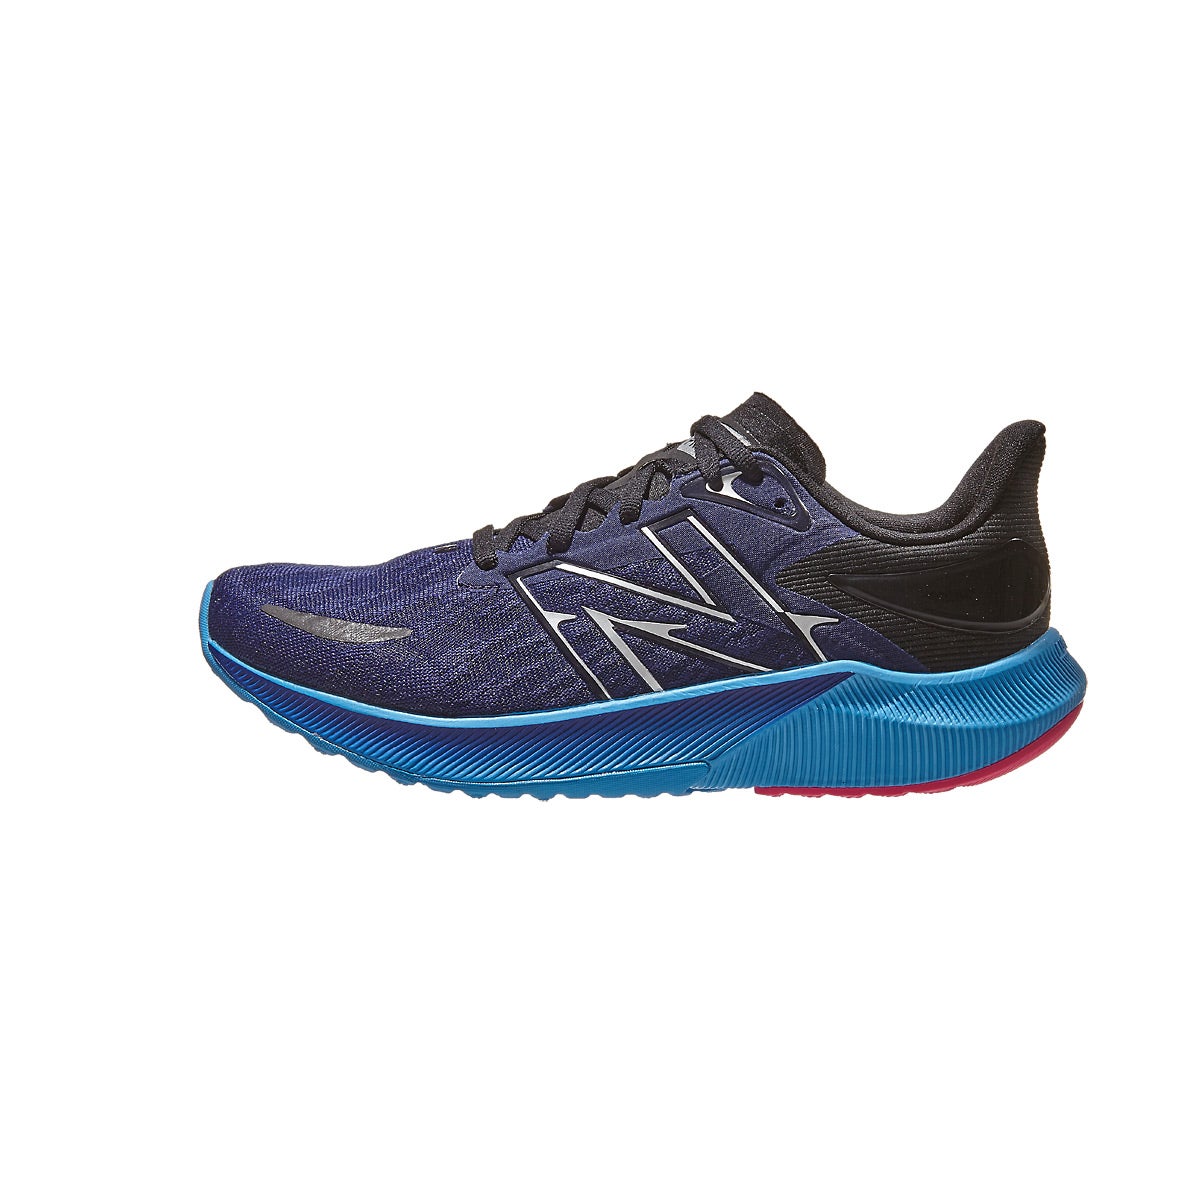 New Balance FuelCell Propel v3 Women's Shoes Tide/Heli 360° View ...